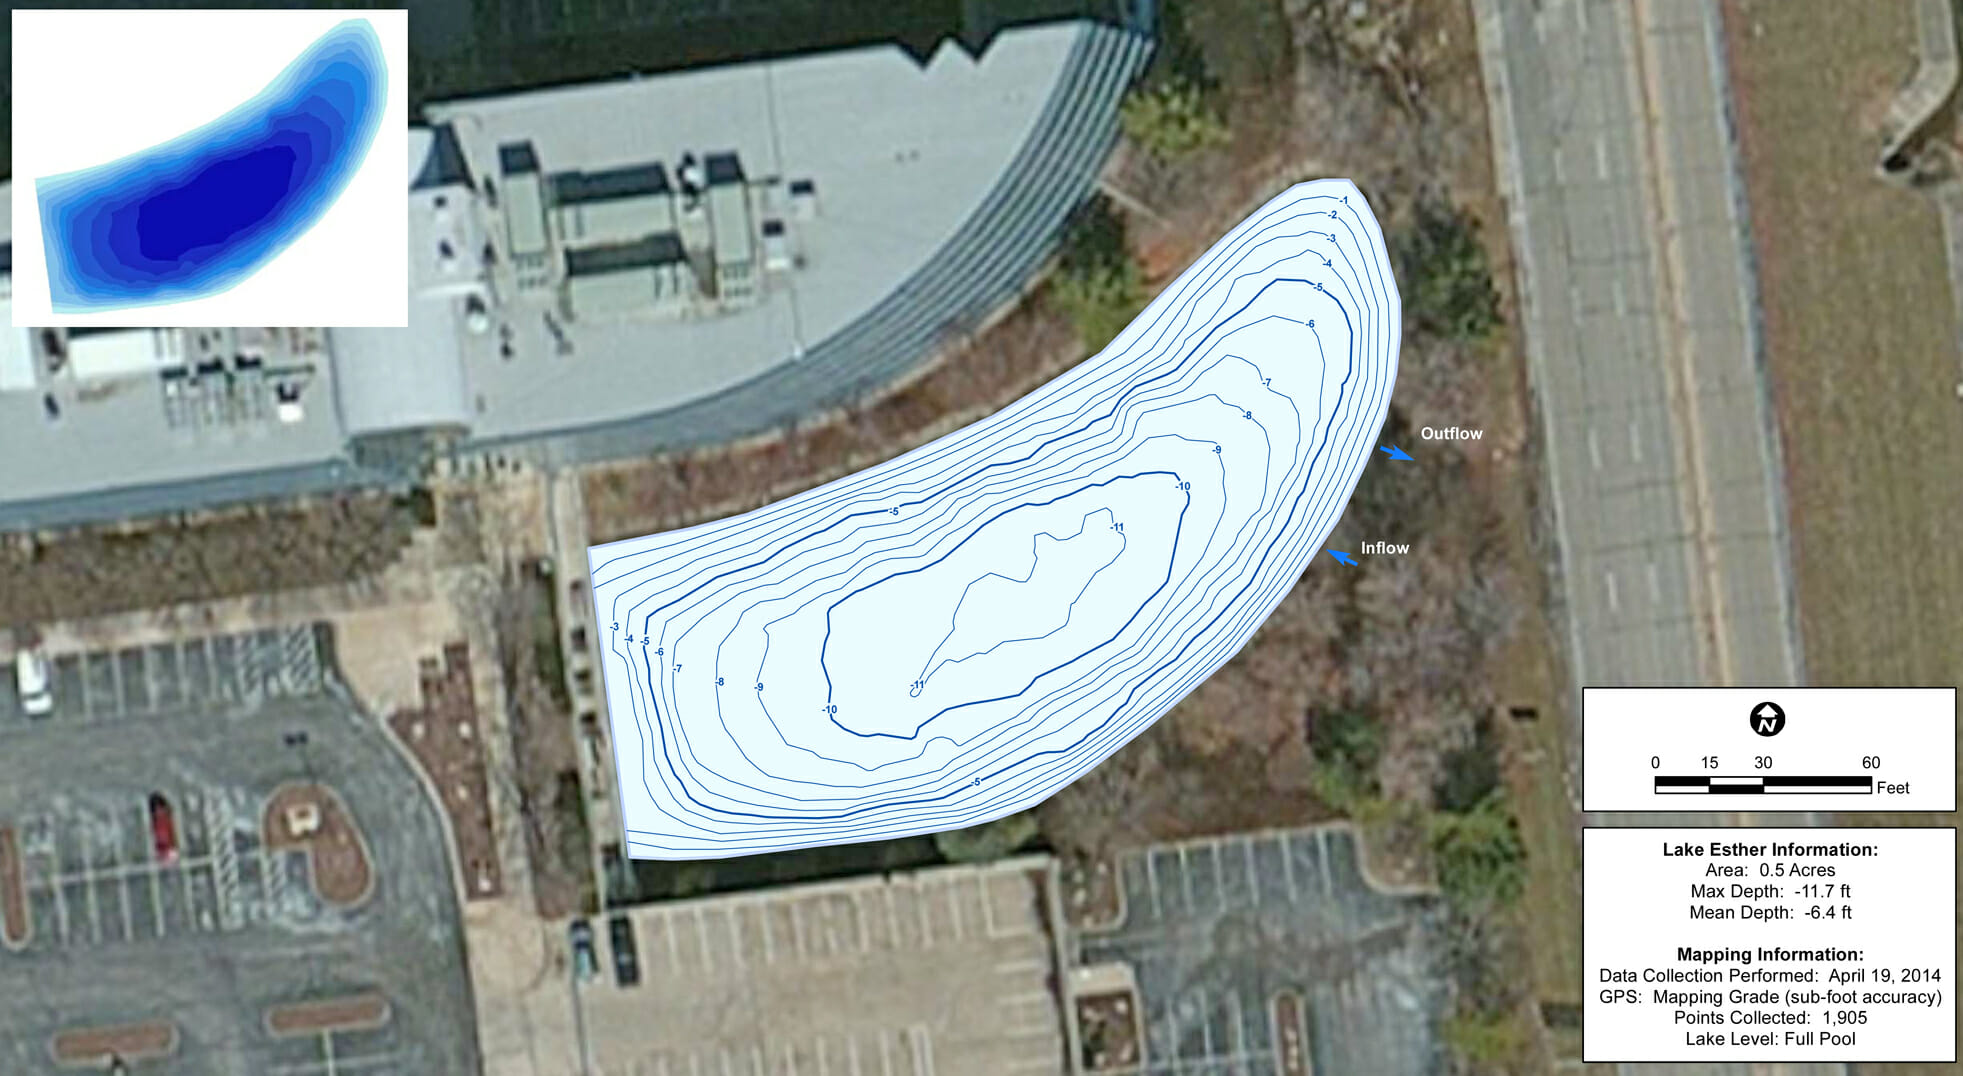 One foot Contour lines showing depth of the pond.  Inflow and Outflow are noted.